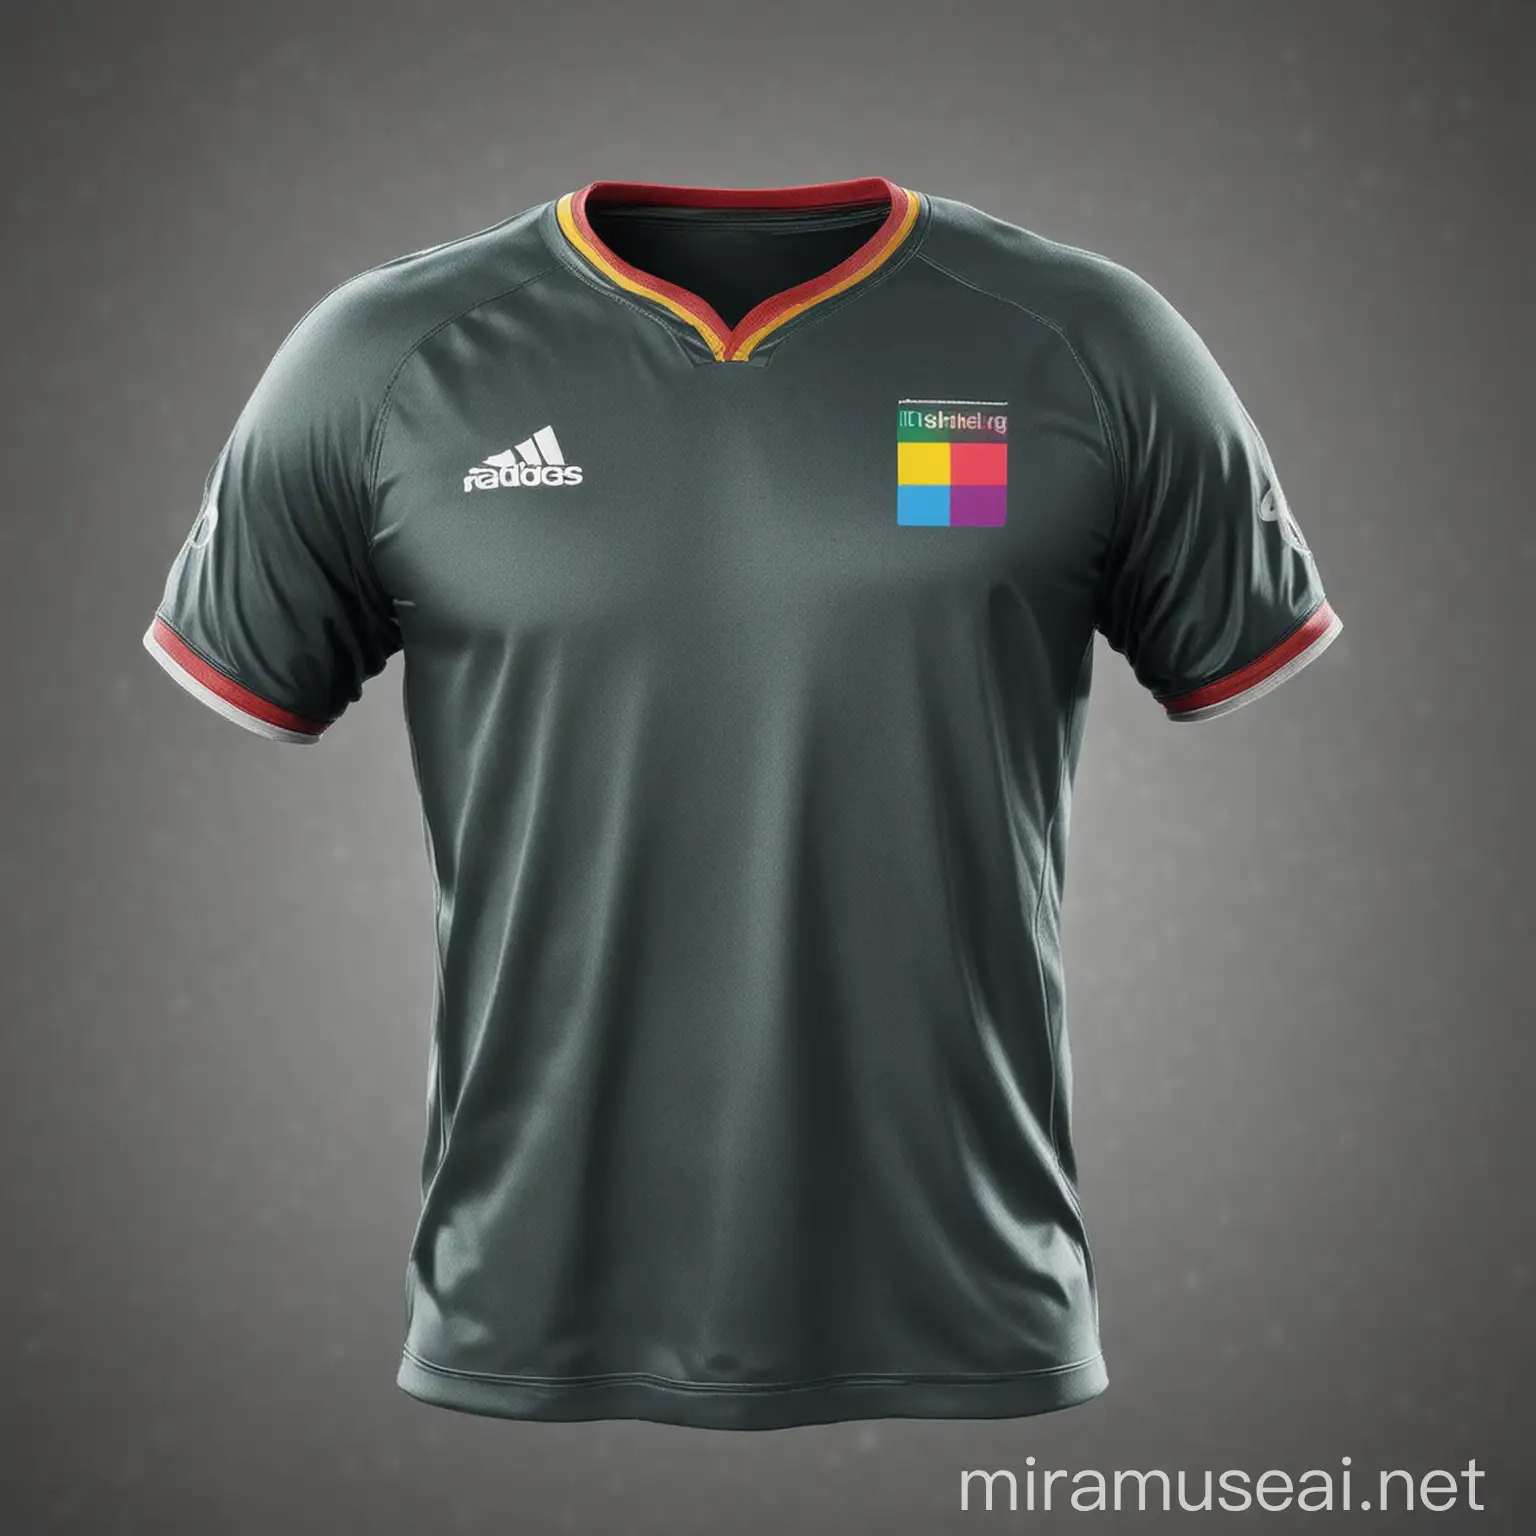 Versatile Sports Jersey Design for Indoor and Outdoor Games in RGB0 95 112